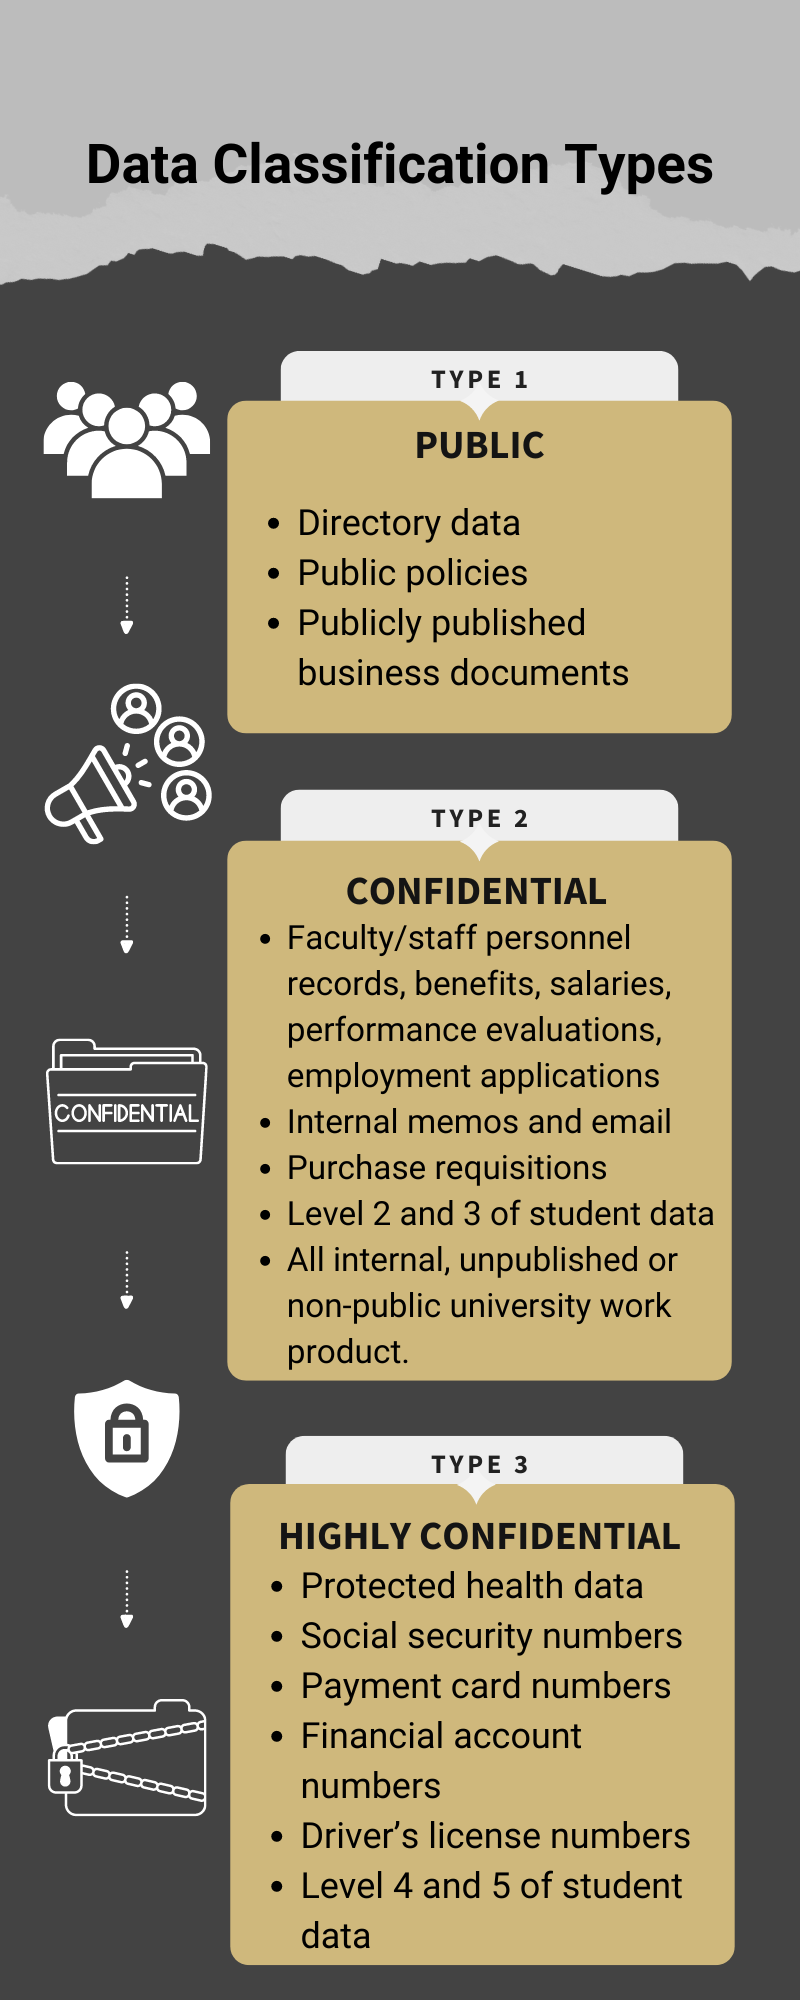 Infographic summarizing the three types of data classification and what each type includes.